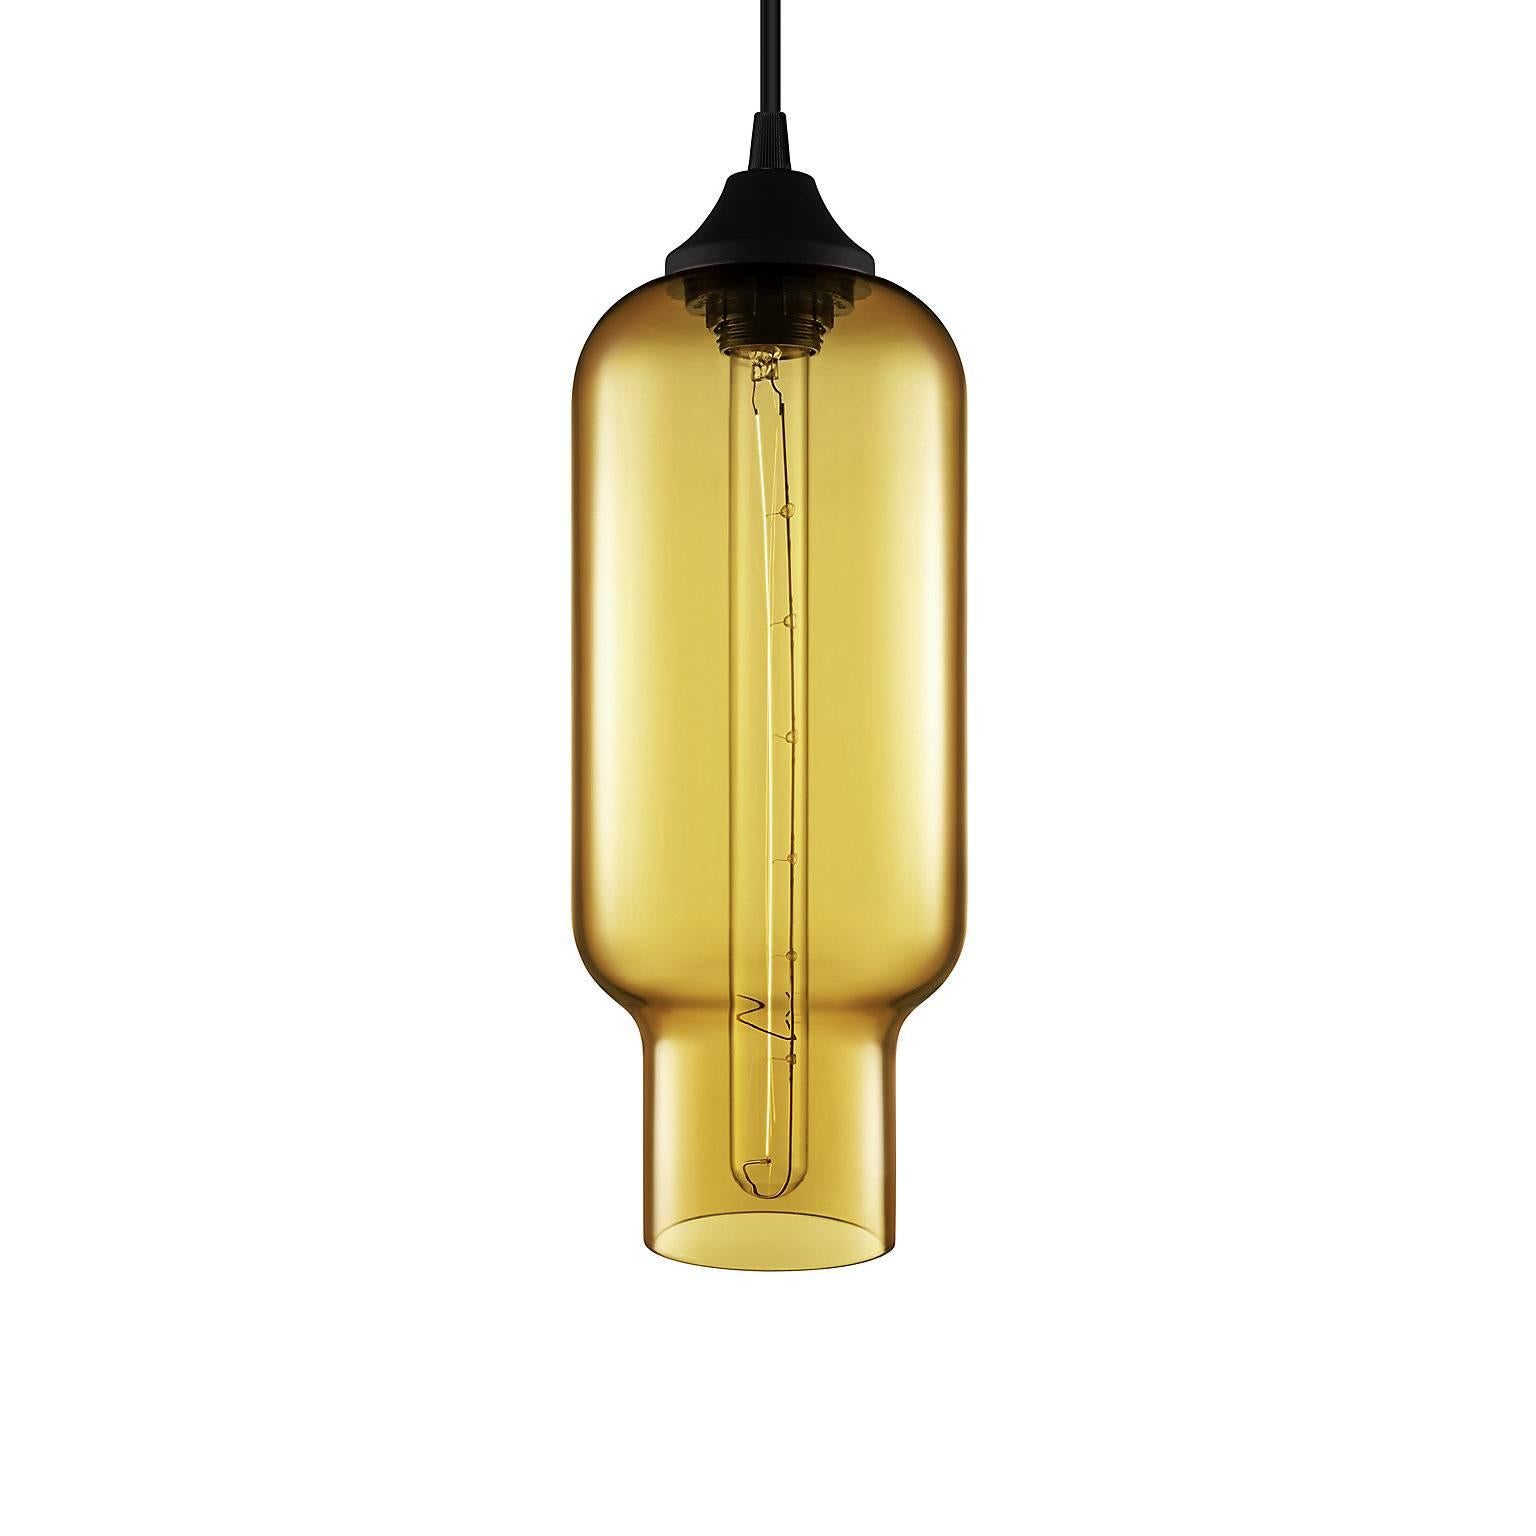 Pharos Smoke Handblown Modern Glass Pendant Light, Made in the USA In New Condition For Sale In Beacon, NY